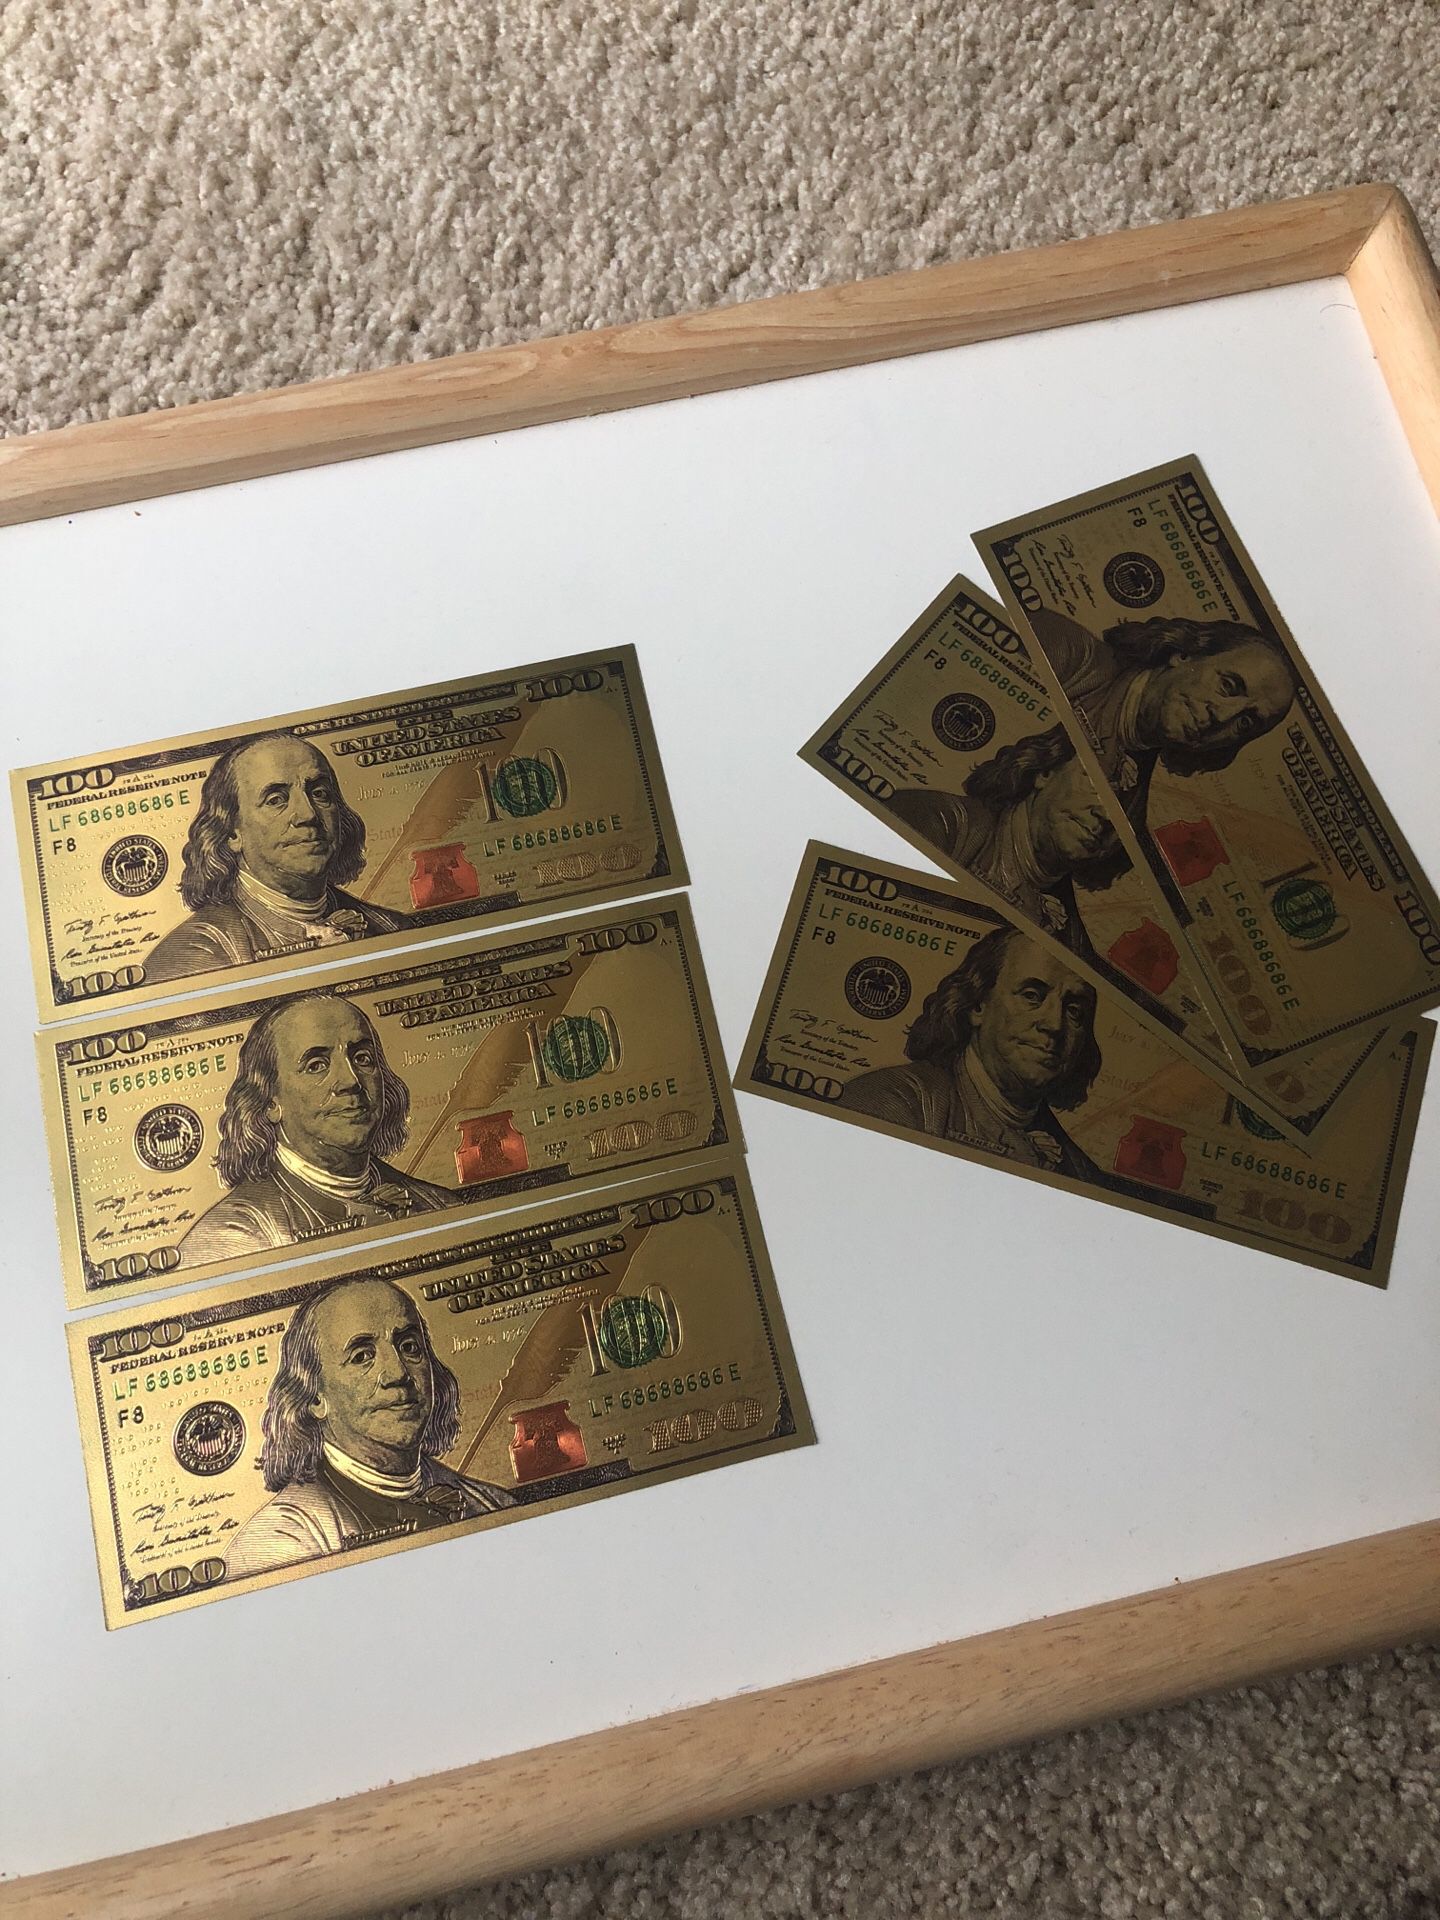 6 Gold Novelty $100 bills not real awesome as gifts